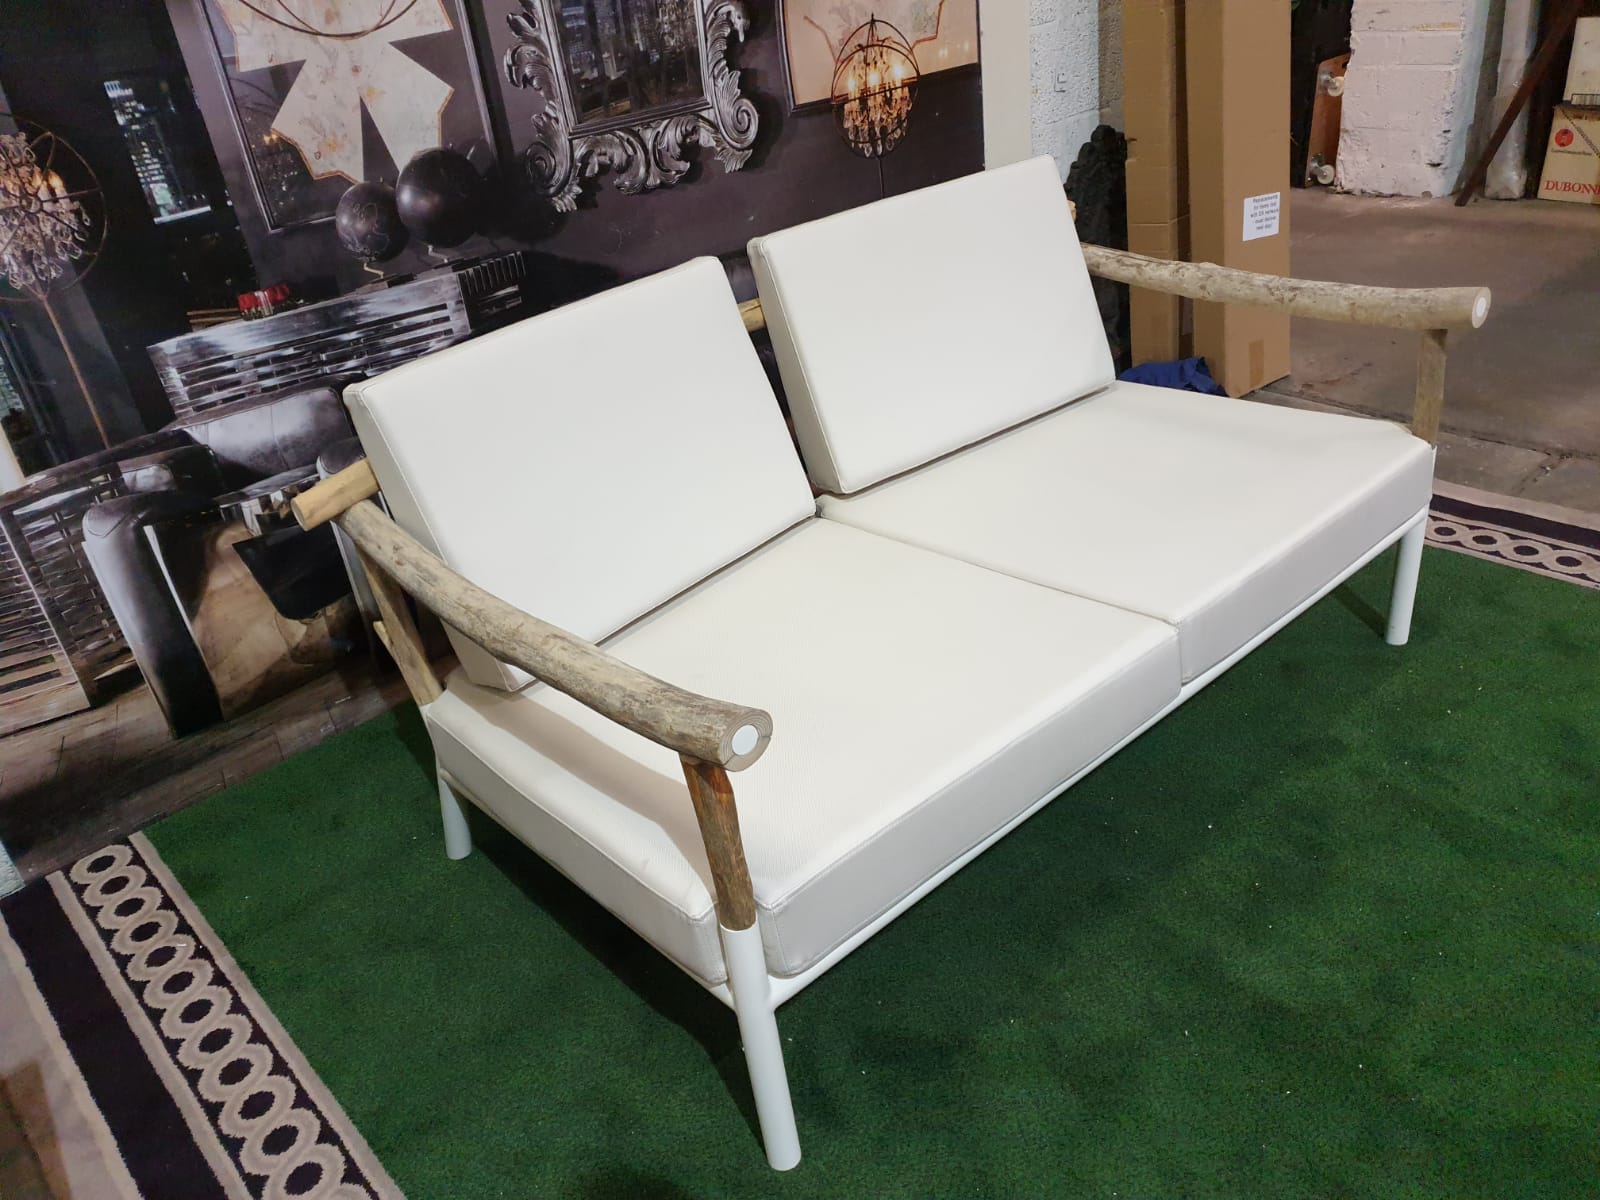 Outline Sofa F244G 2 Seater Visually Light And Elegant Sofa Series With Deep Seating For High